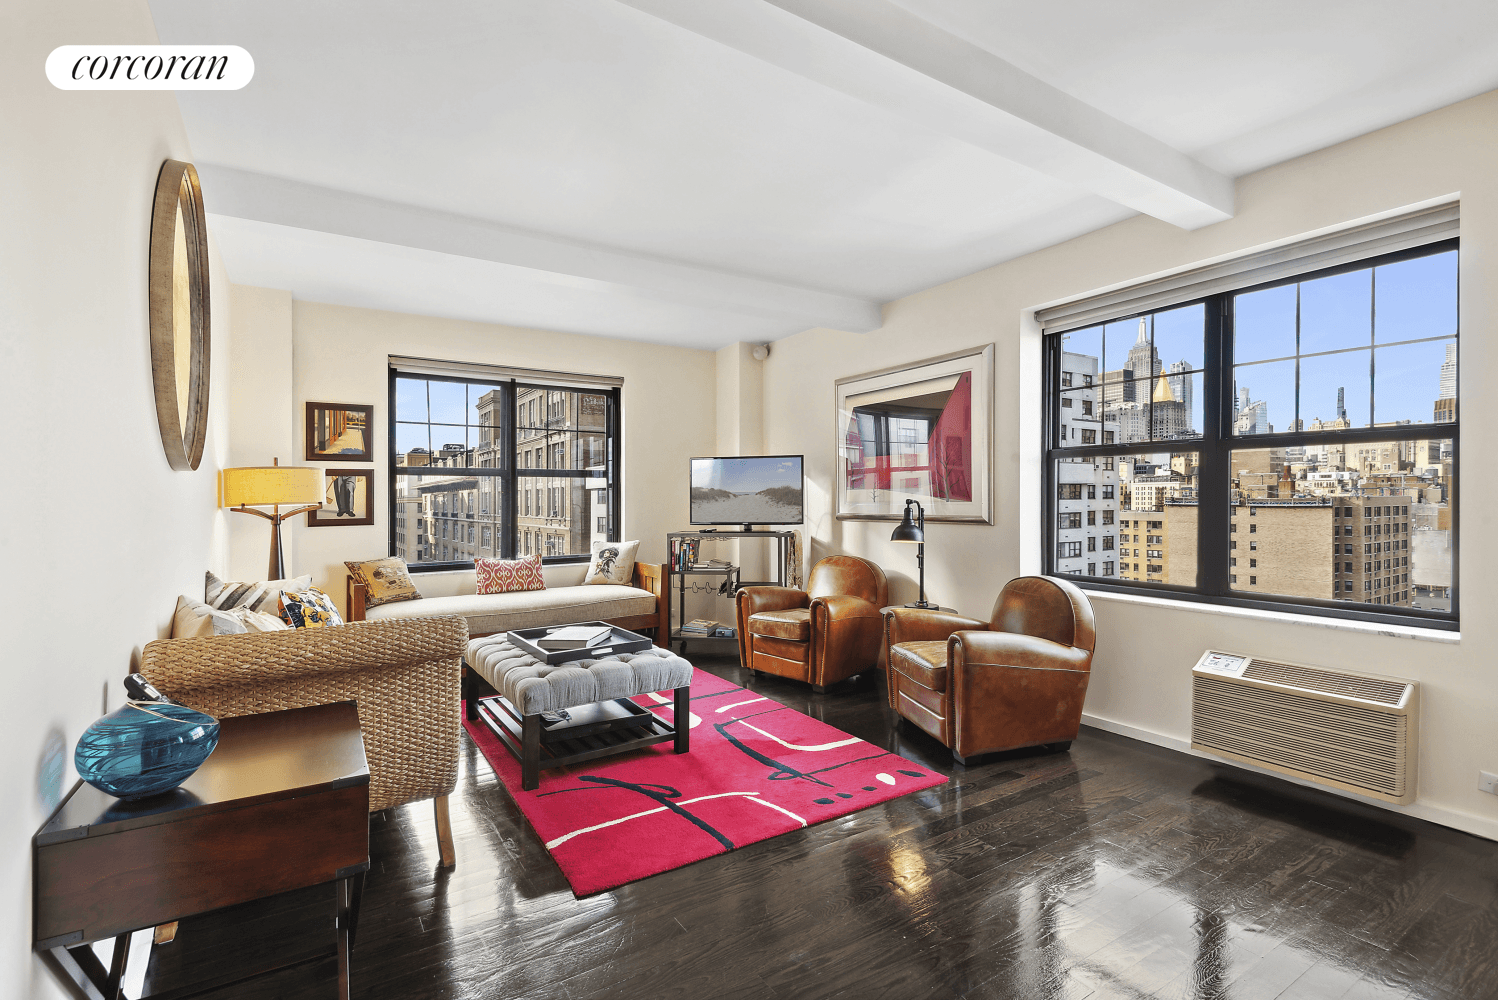 Few apartments in our experience come as close to the ideal for a Manhattan one bedroom as 14H at 200 East 16th.